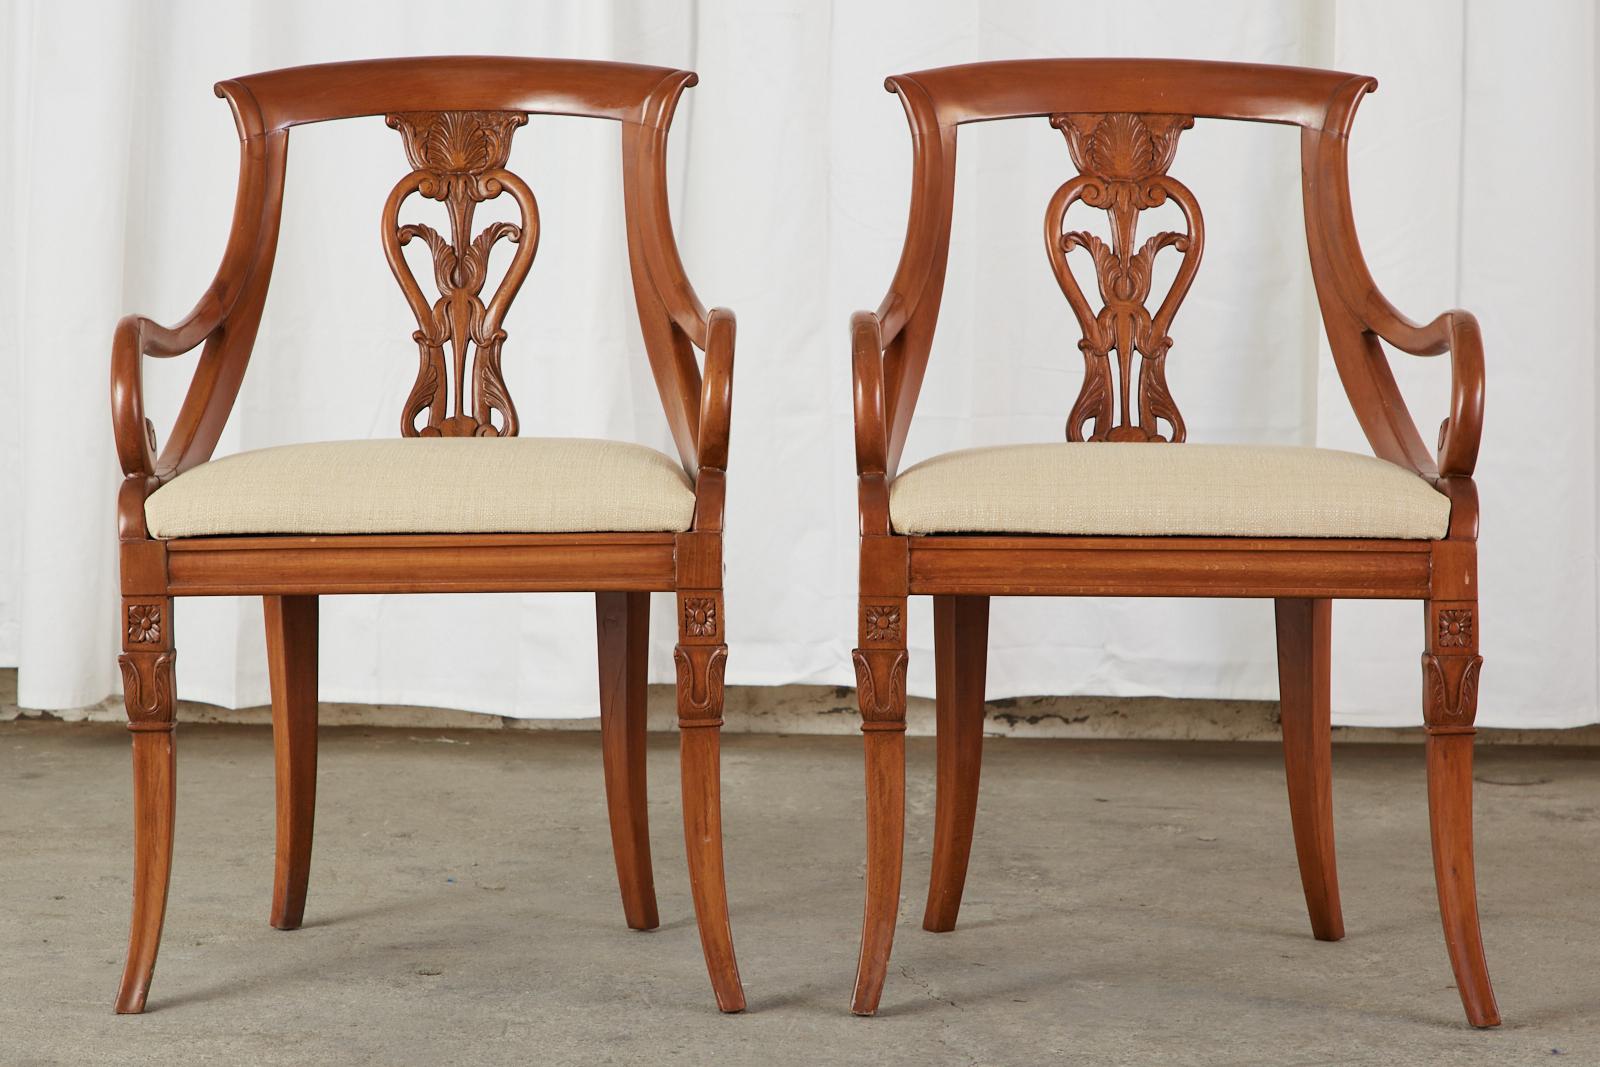 Magnificent set of eight French gondola style dining chairs crafted in the neoclassical empire taste. The gracefully curved frames are carved from fruitwood having a decorative foliate acanthus motif back splat. The set consists of six side chairs